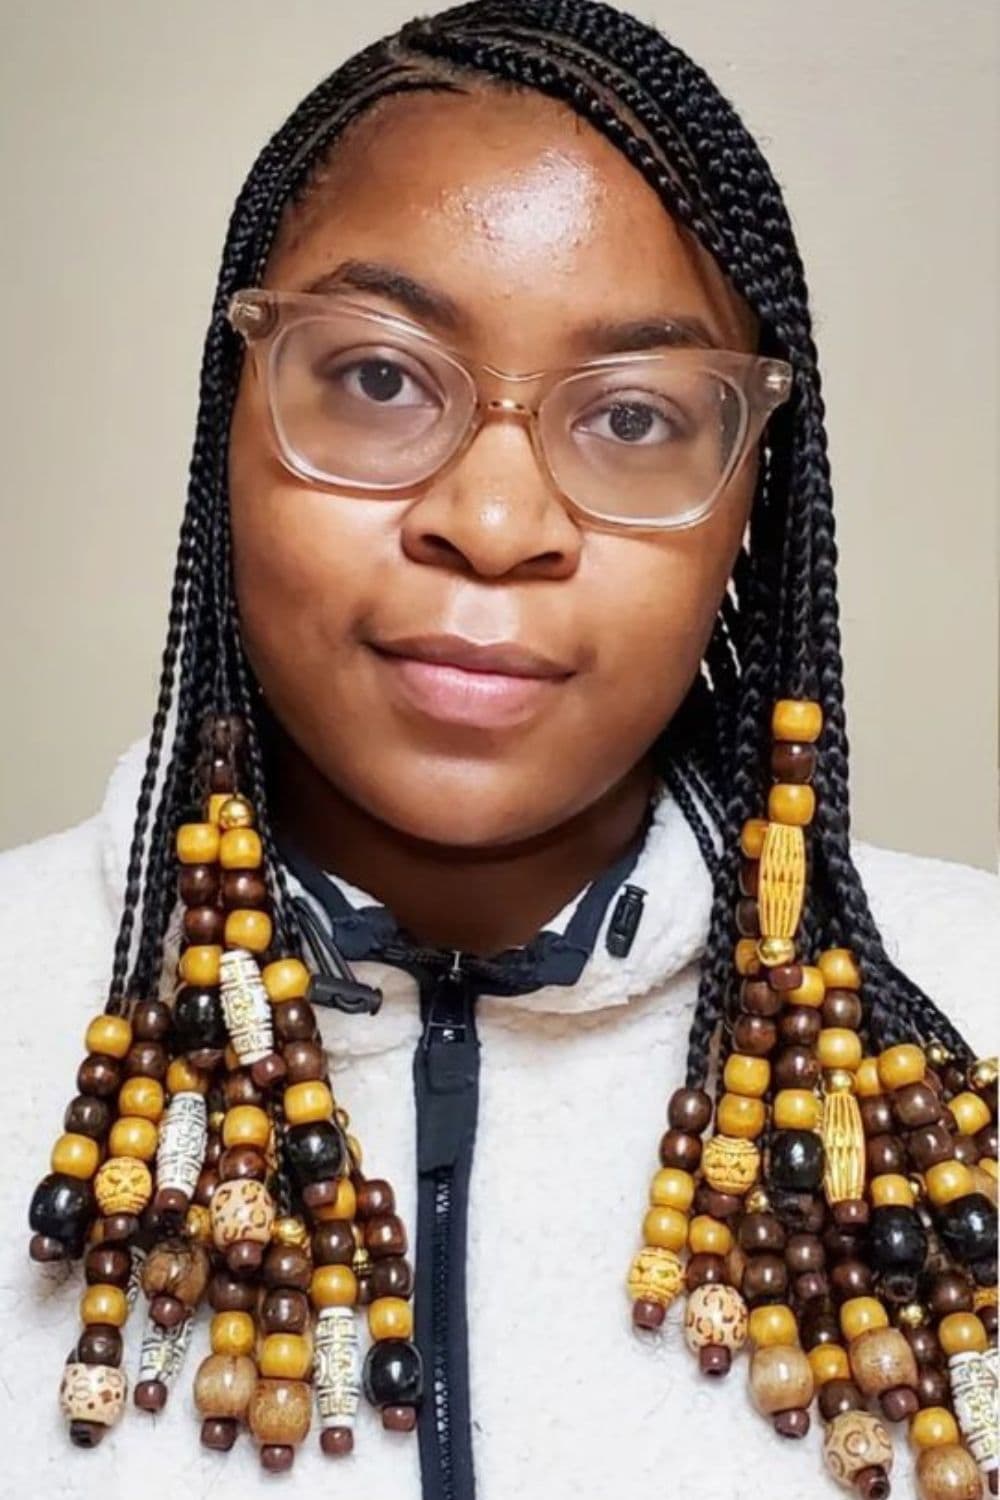 A woman wearing eyeglasses with side-part cornrows with beads.